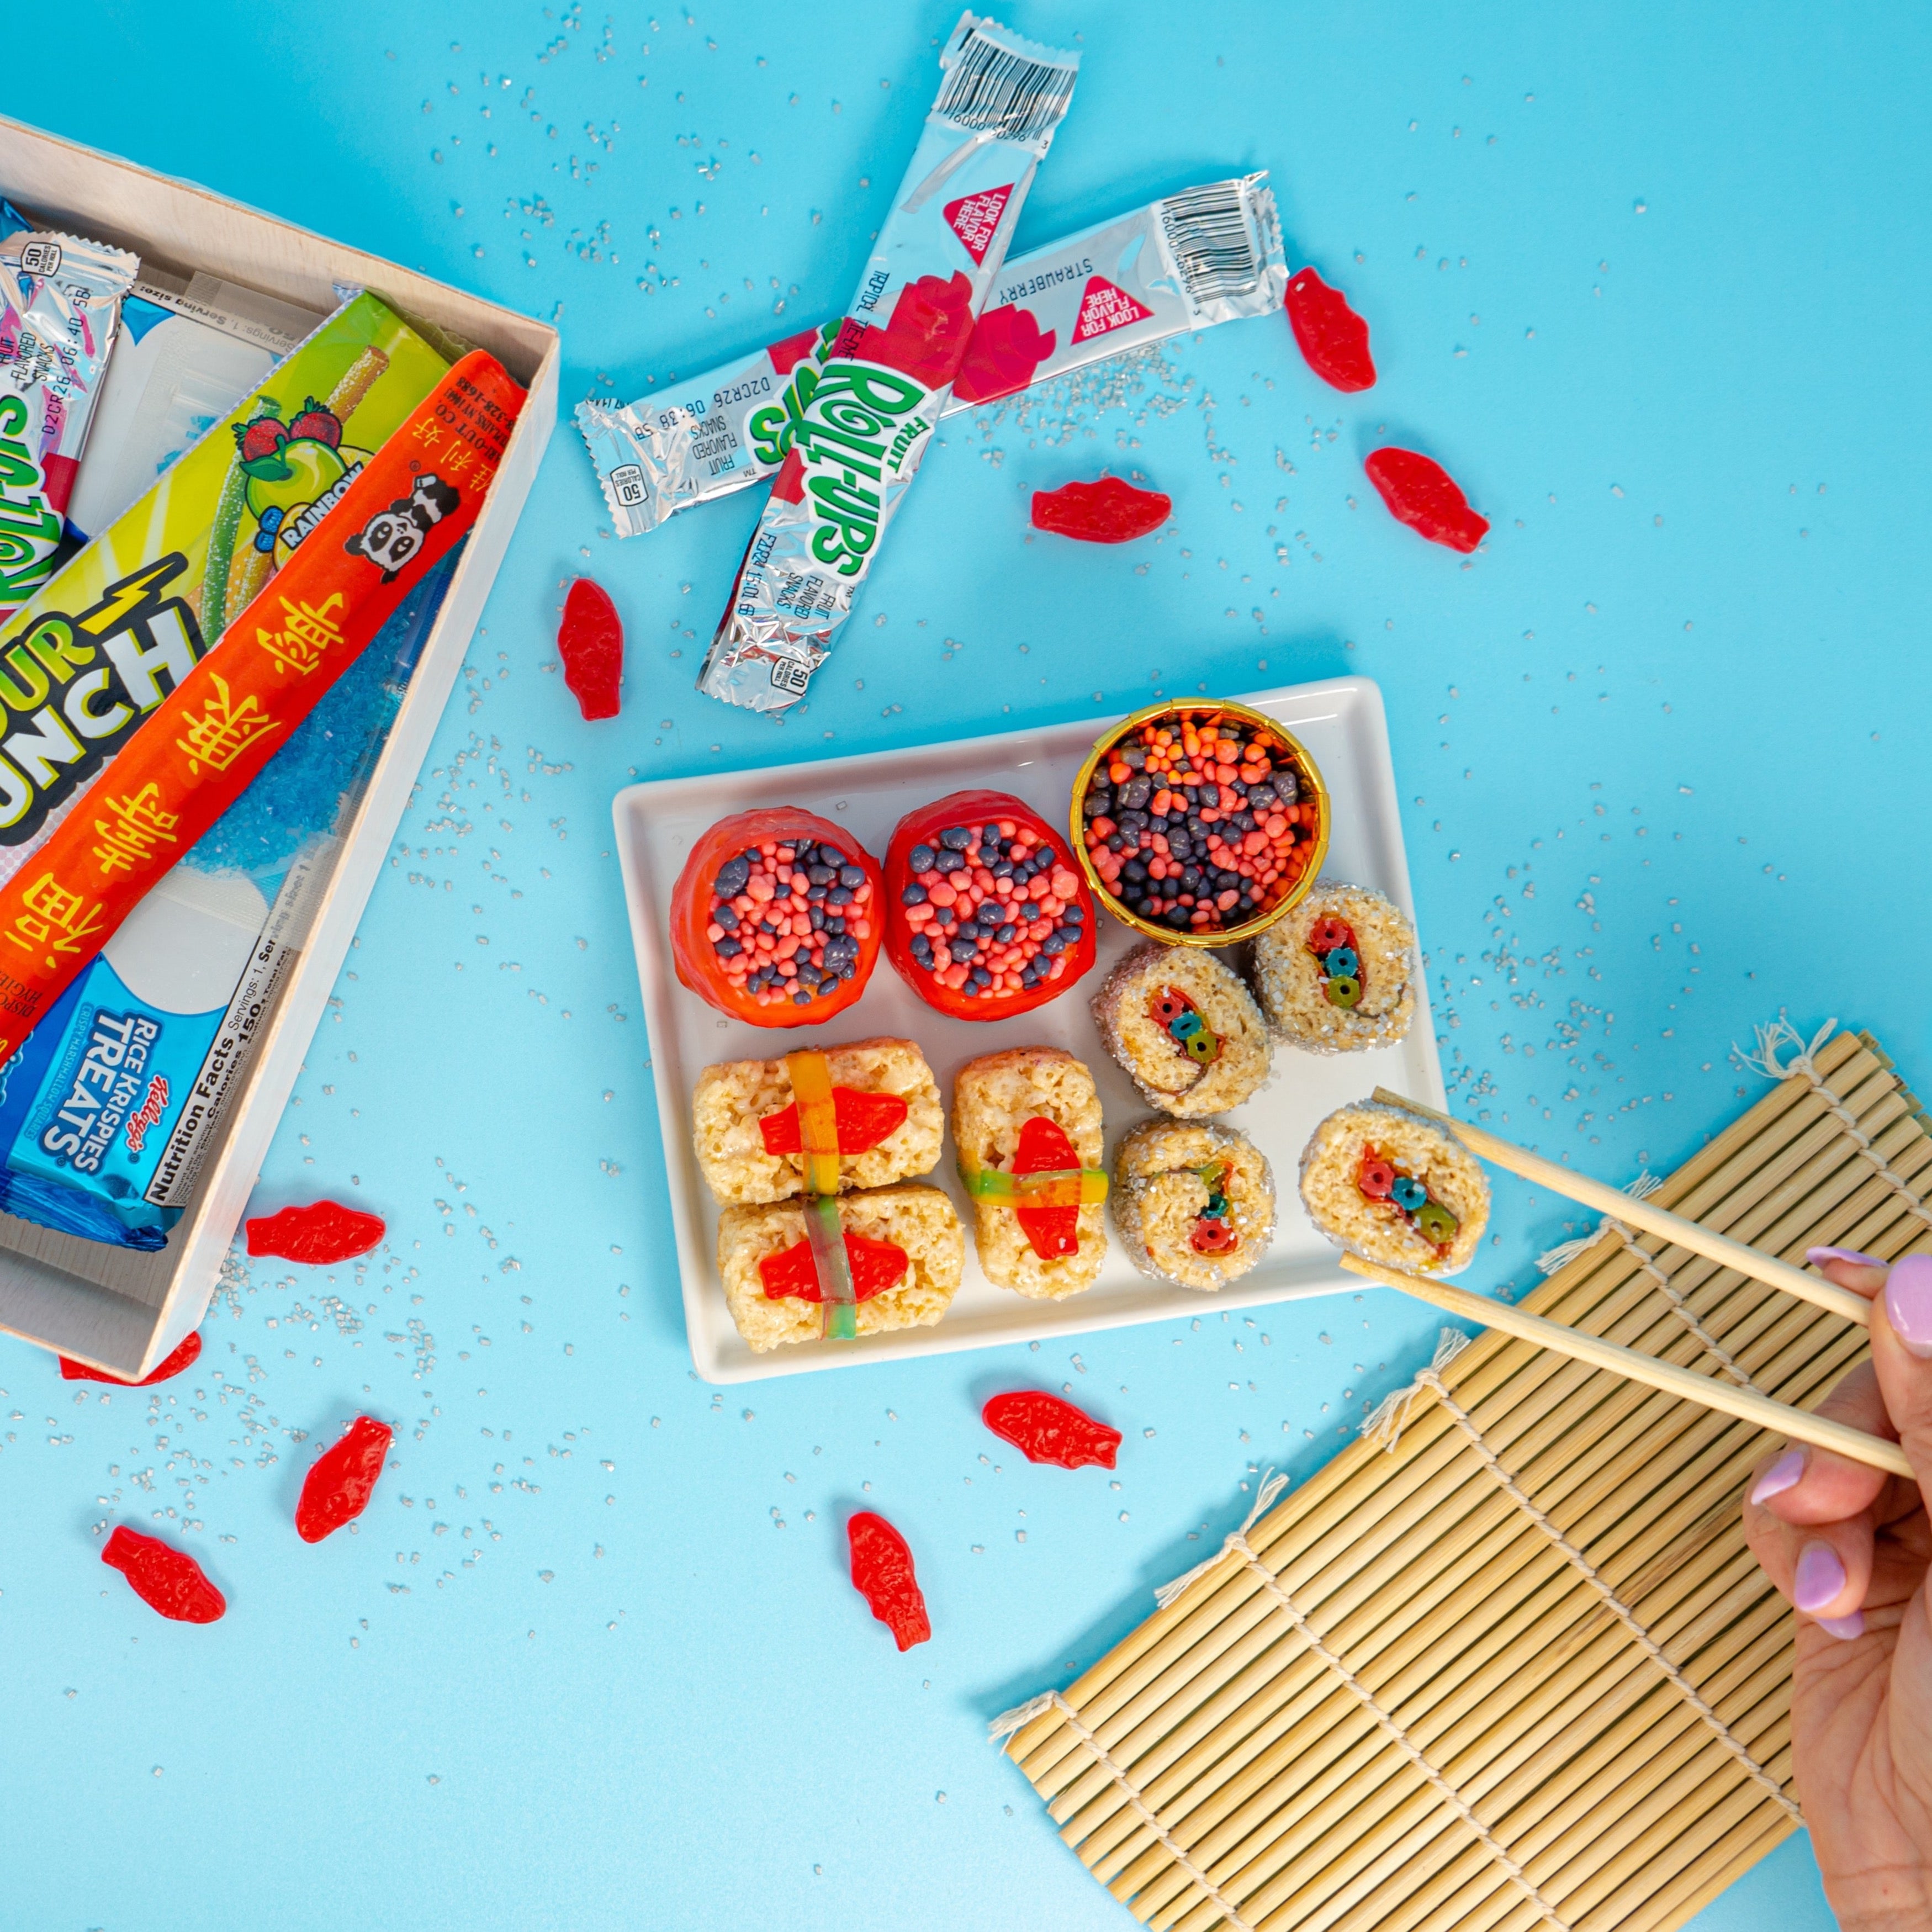 The Creative Kitchen Make Your Own Candy Sushi Kit | Sweet DIY Kits | DIY Food Kits: Make Your Own Food | DIY Gifts